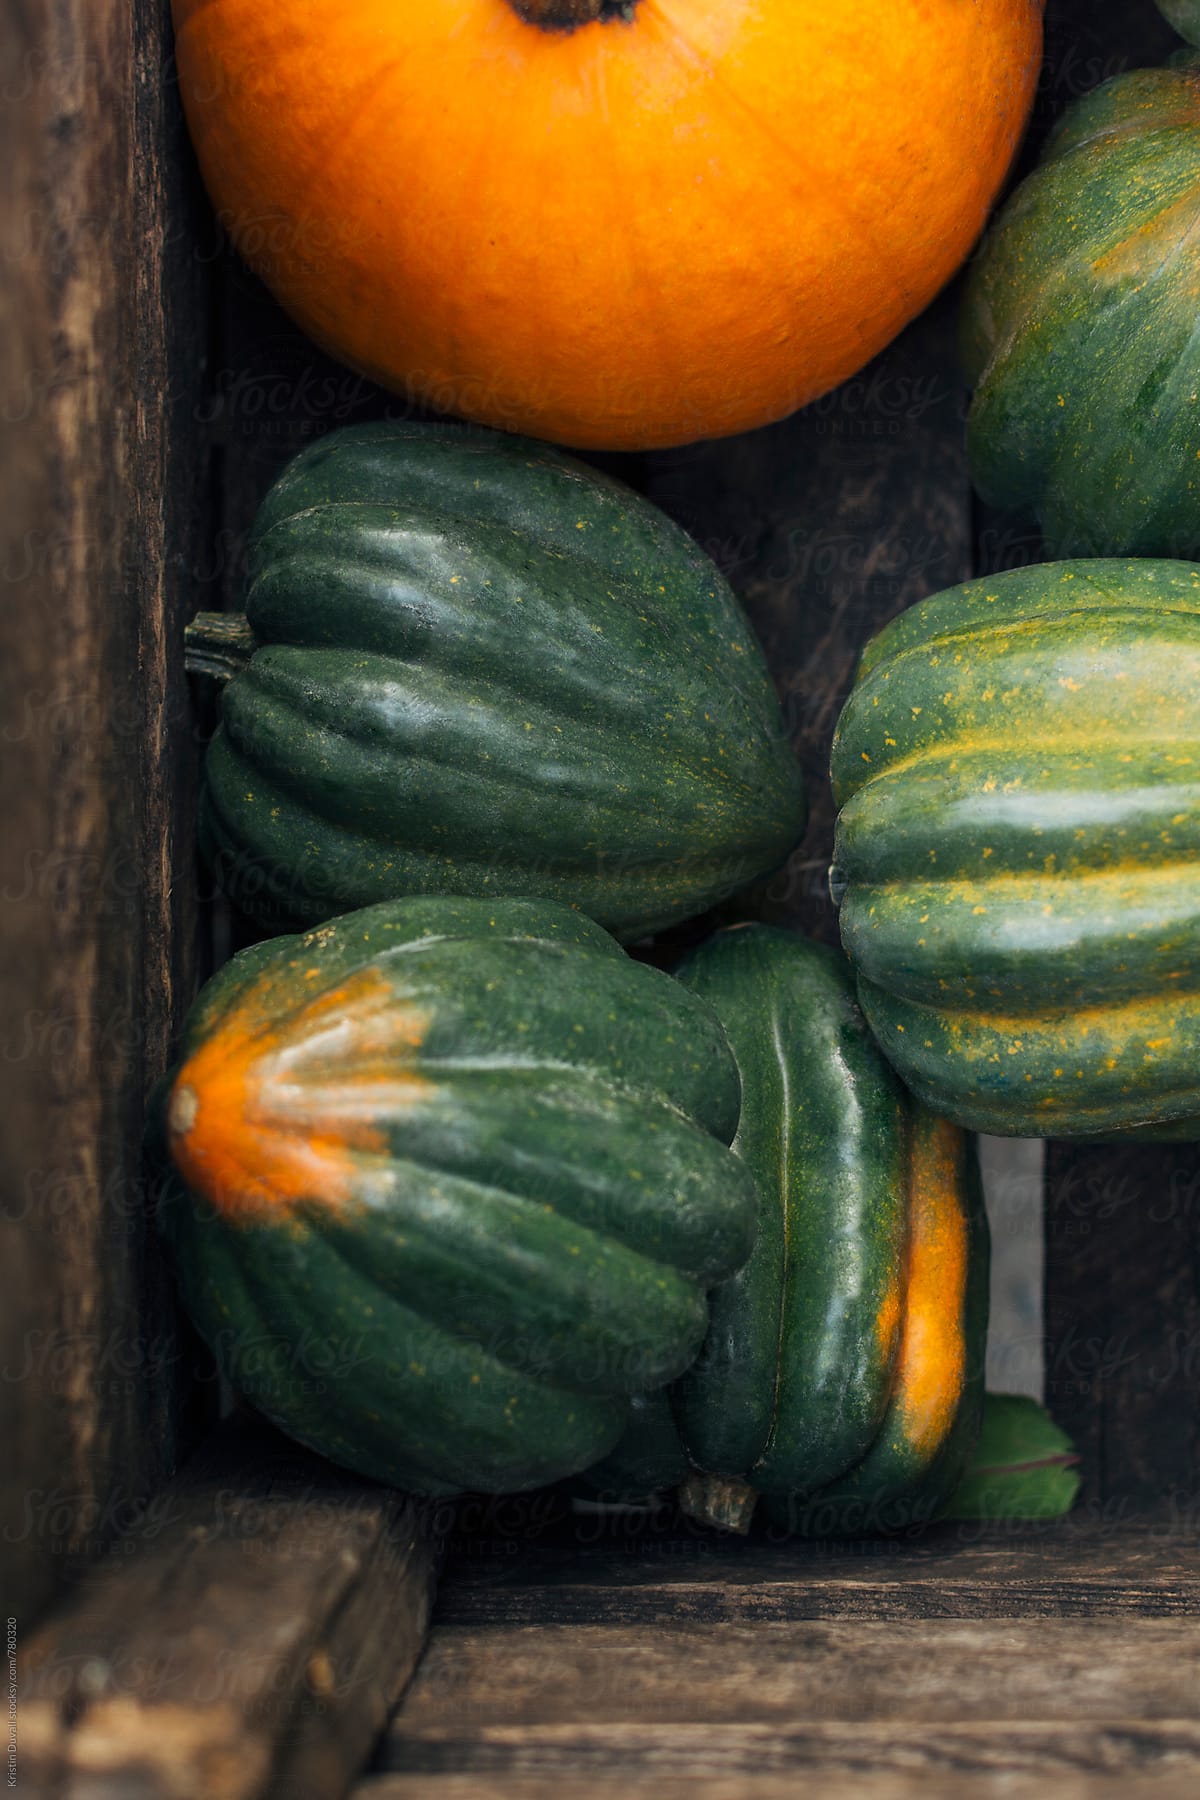 Crate filled with acorn squash